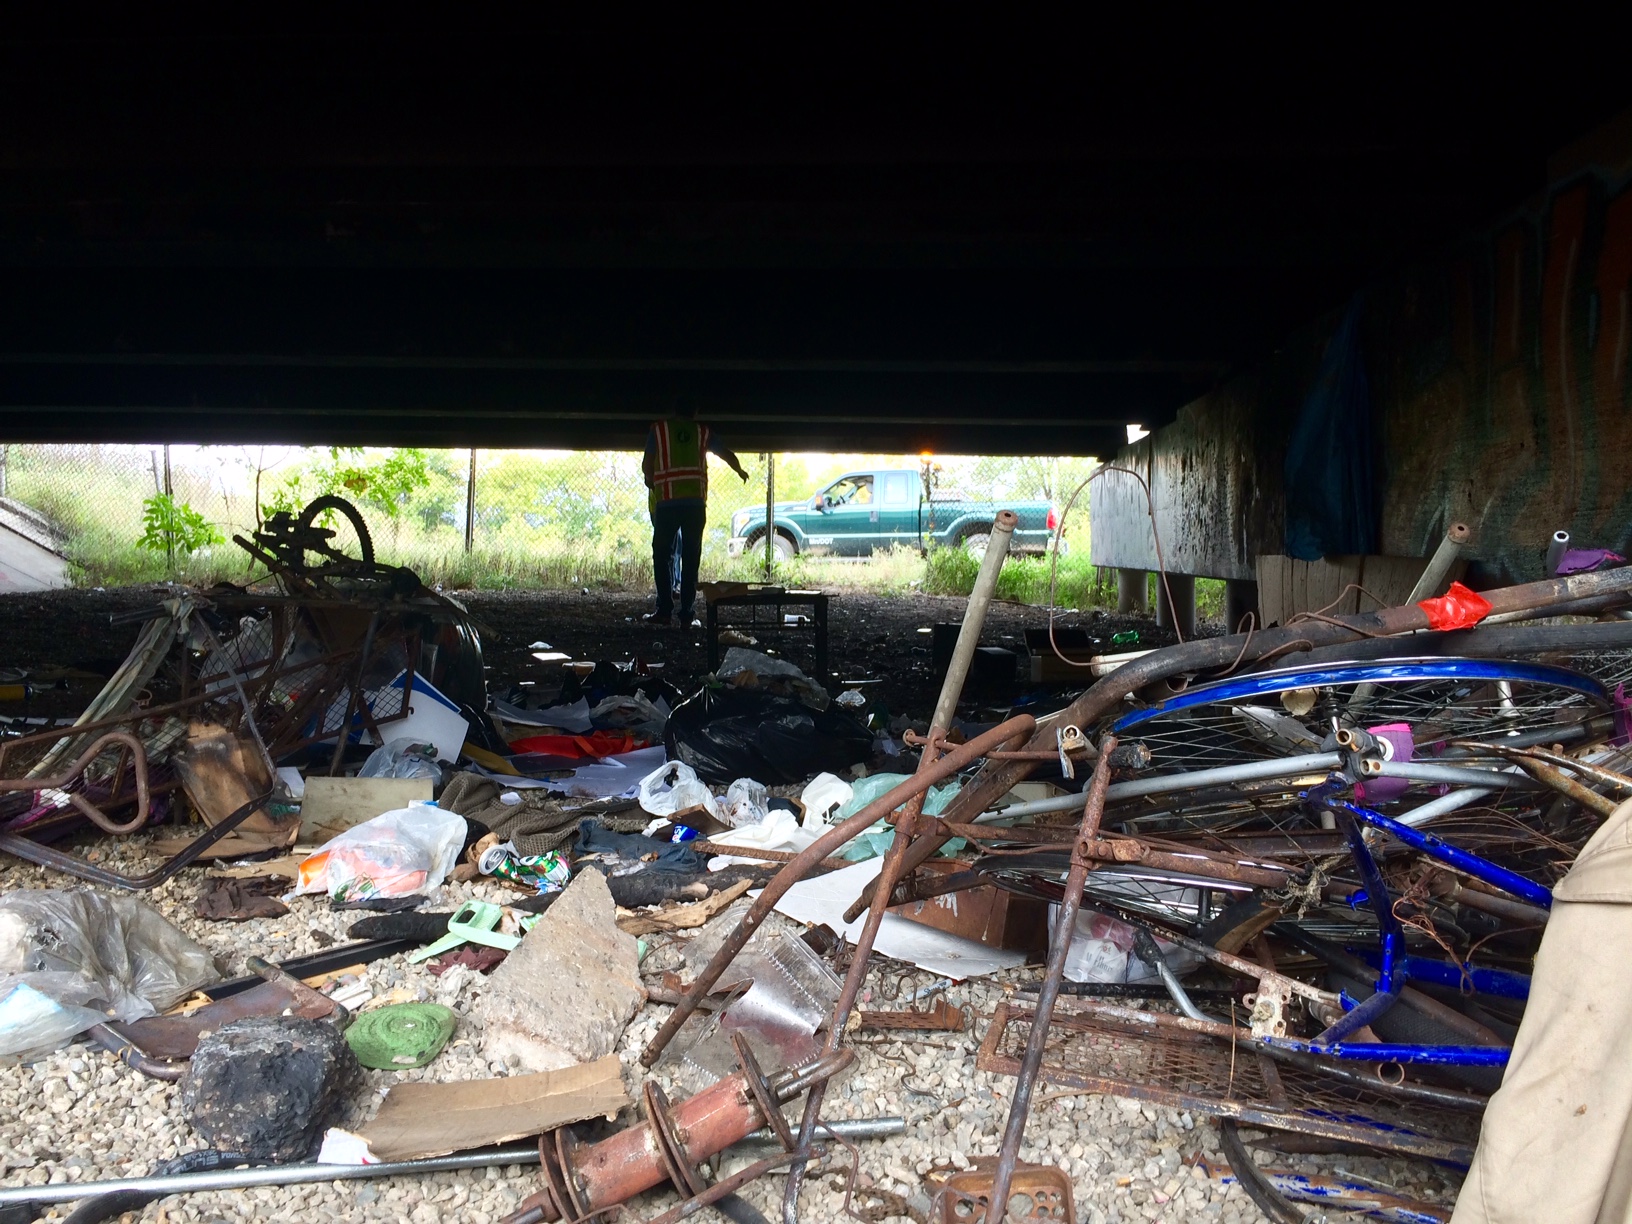 A homeless encampment under I-394 the day after a MnDOT "bridge cleaning." (credit: CBS)